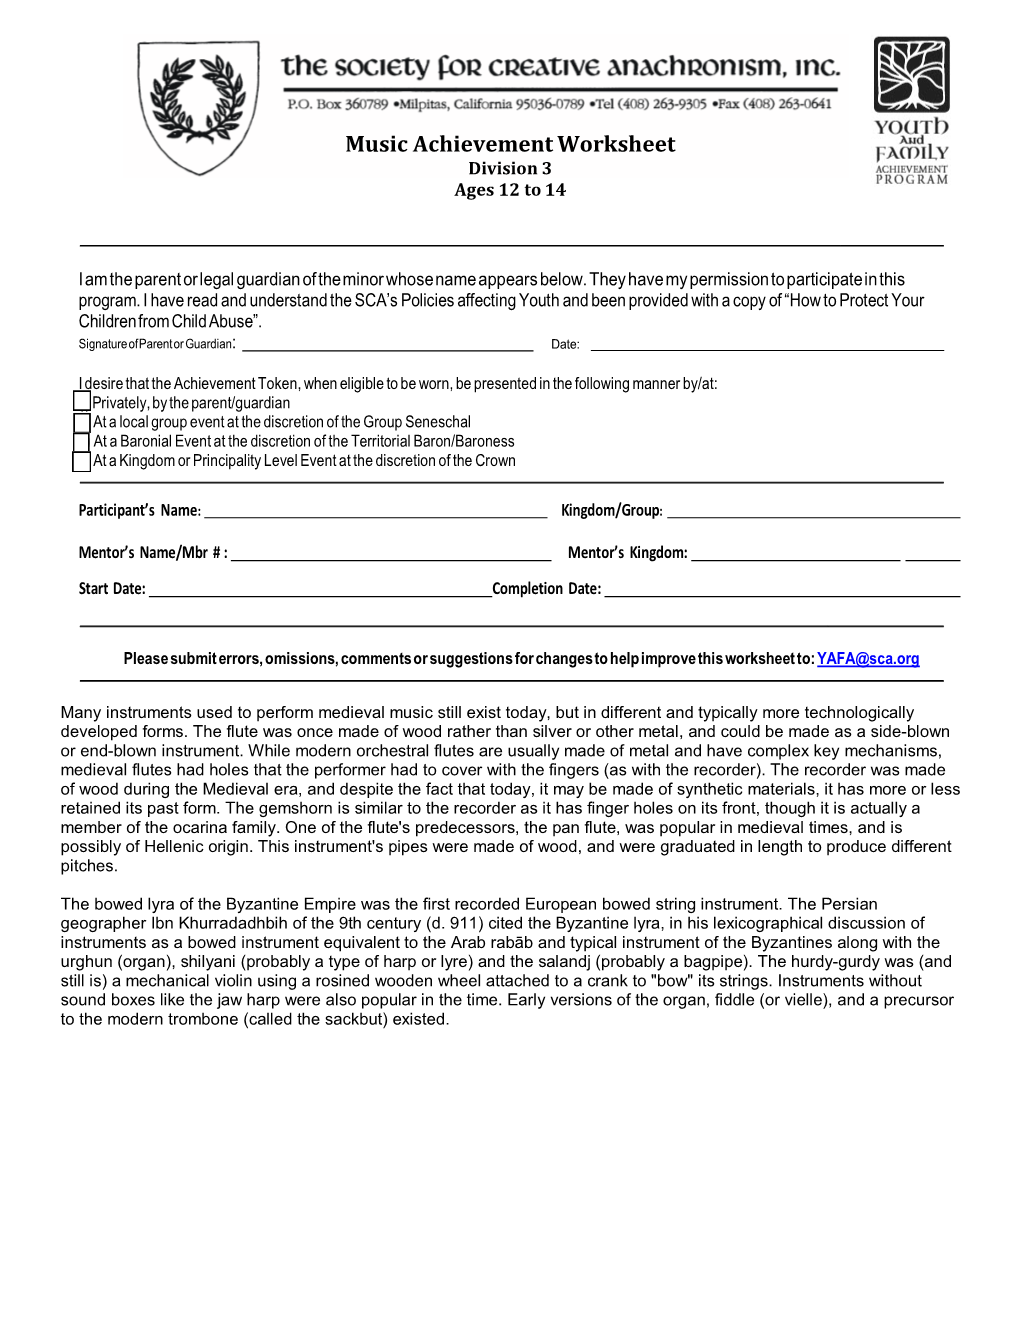 Music Achievement Worksheet Division 3 Ages 12 to 14